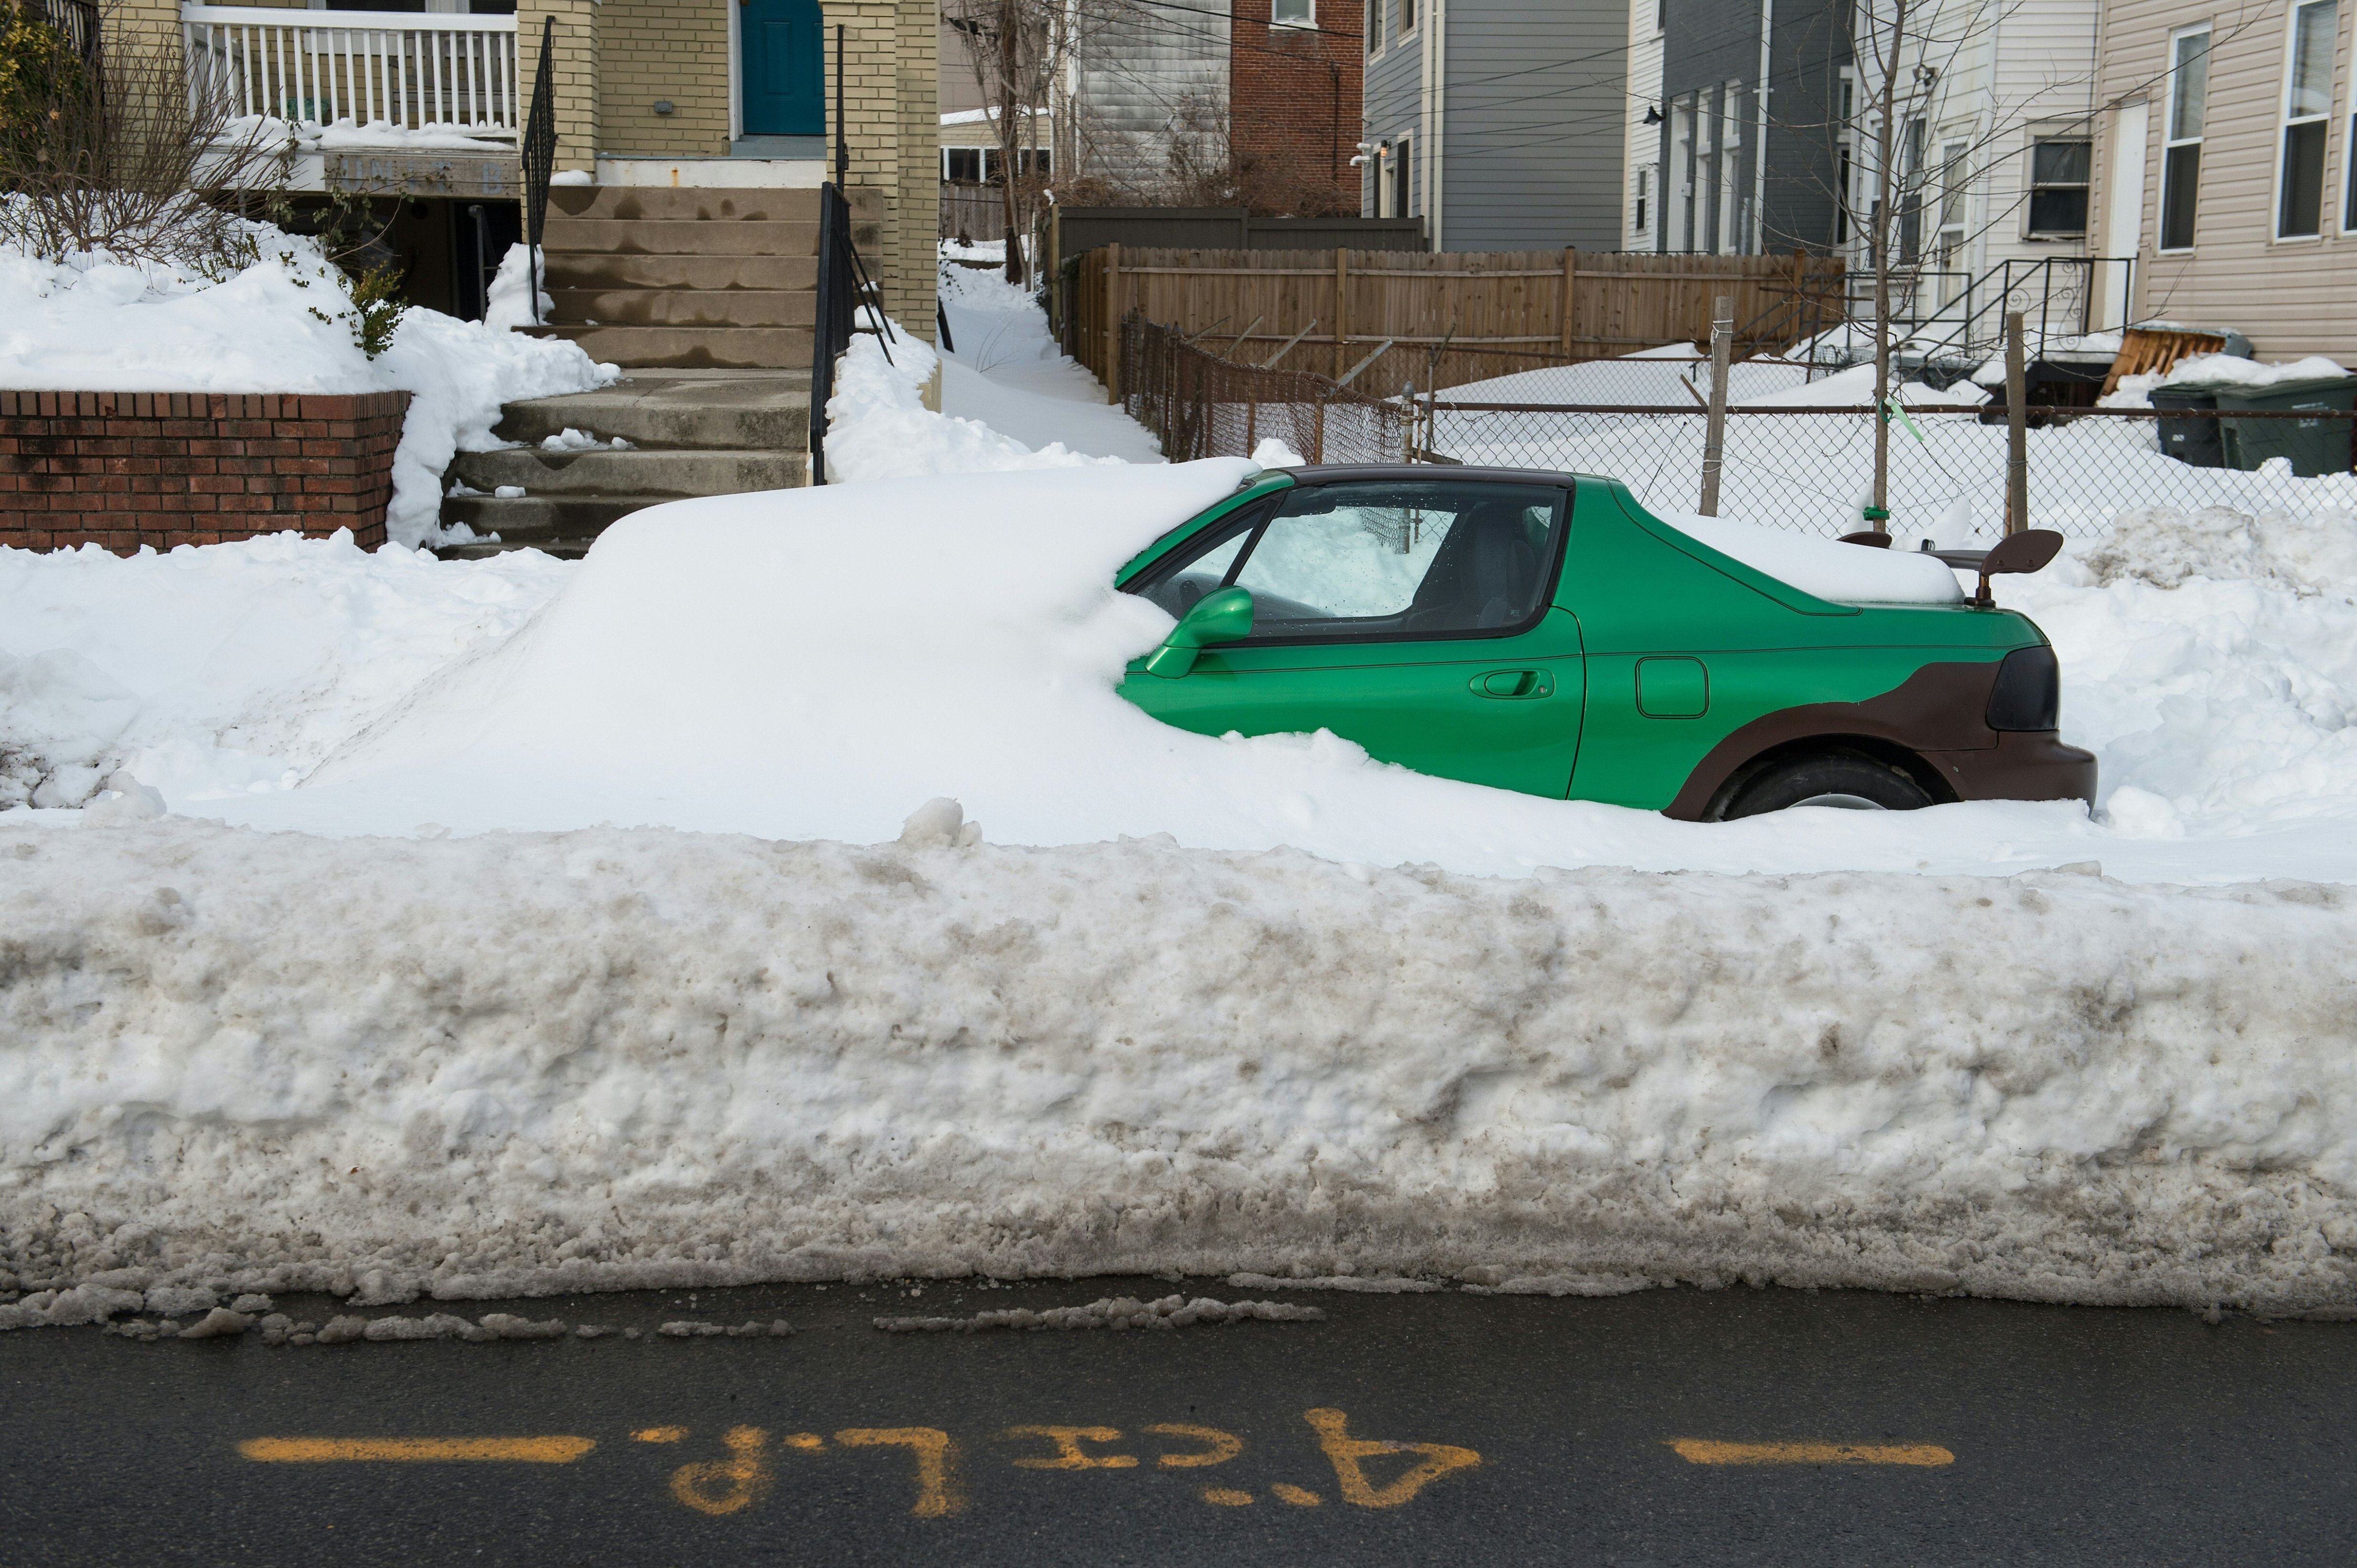 A car is stuck in snow along a street in Washington, DC, on Jan. 26. (Nicholas Kamm—AFP/Getty Images)